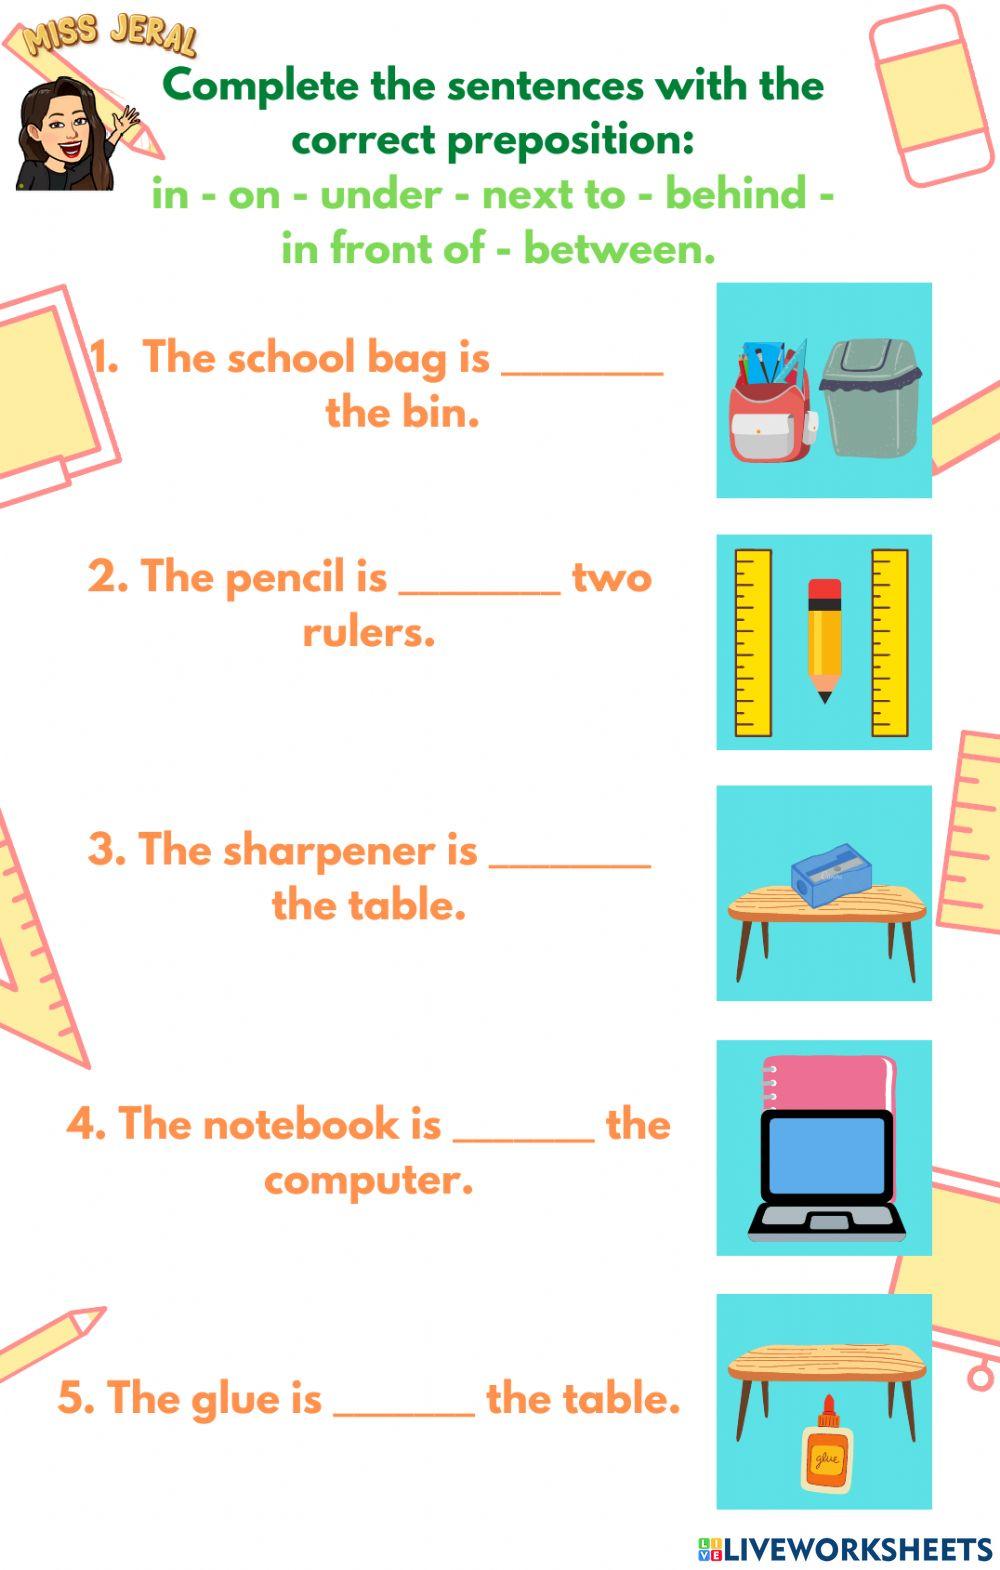 Prepositions and School Objects